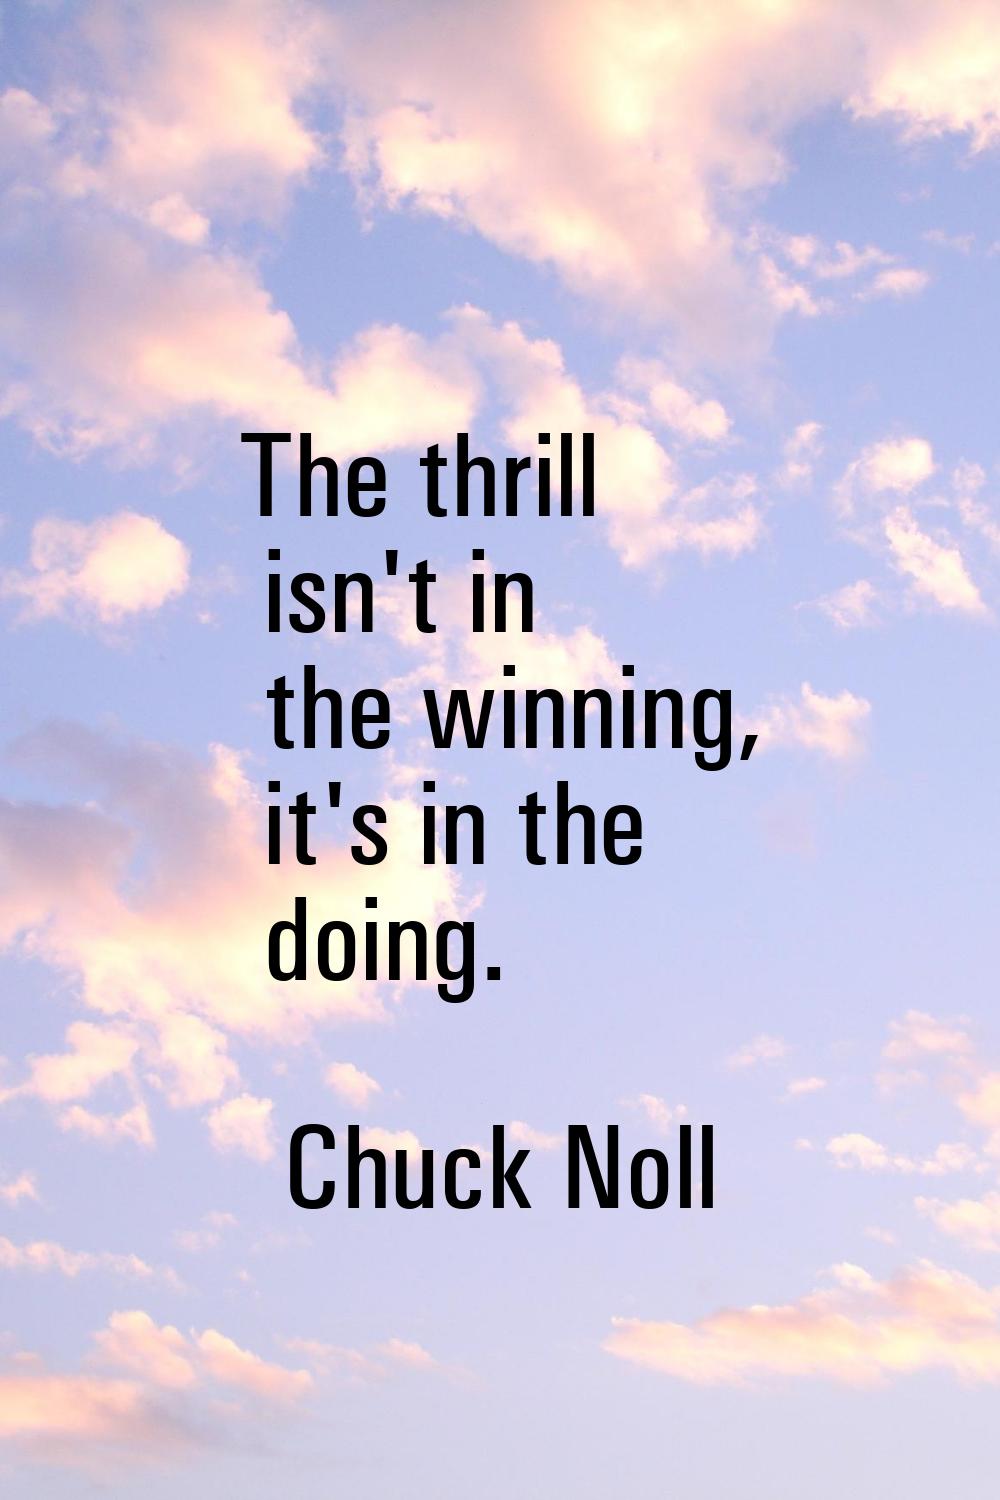 The thrill isn't in the winning, it's in the doing.